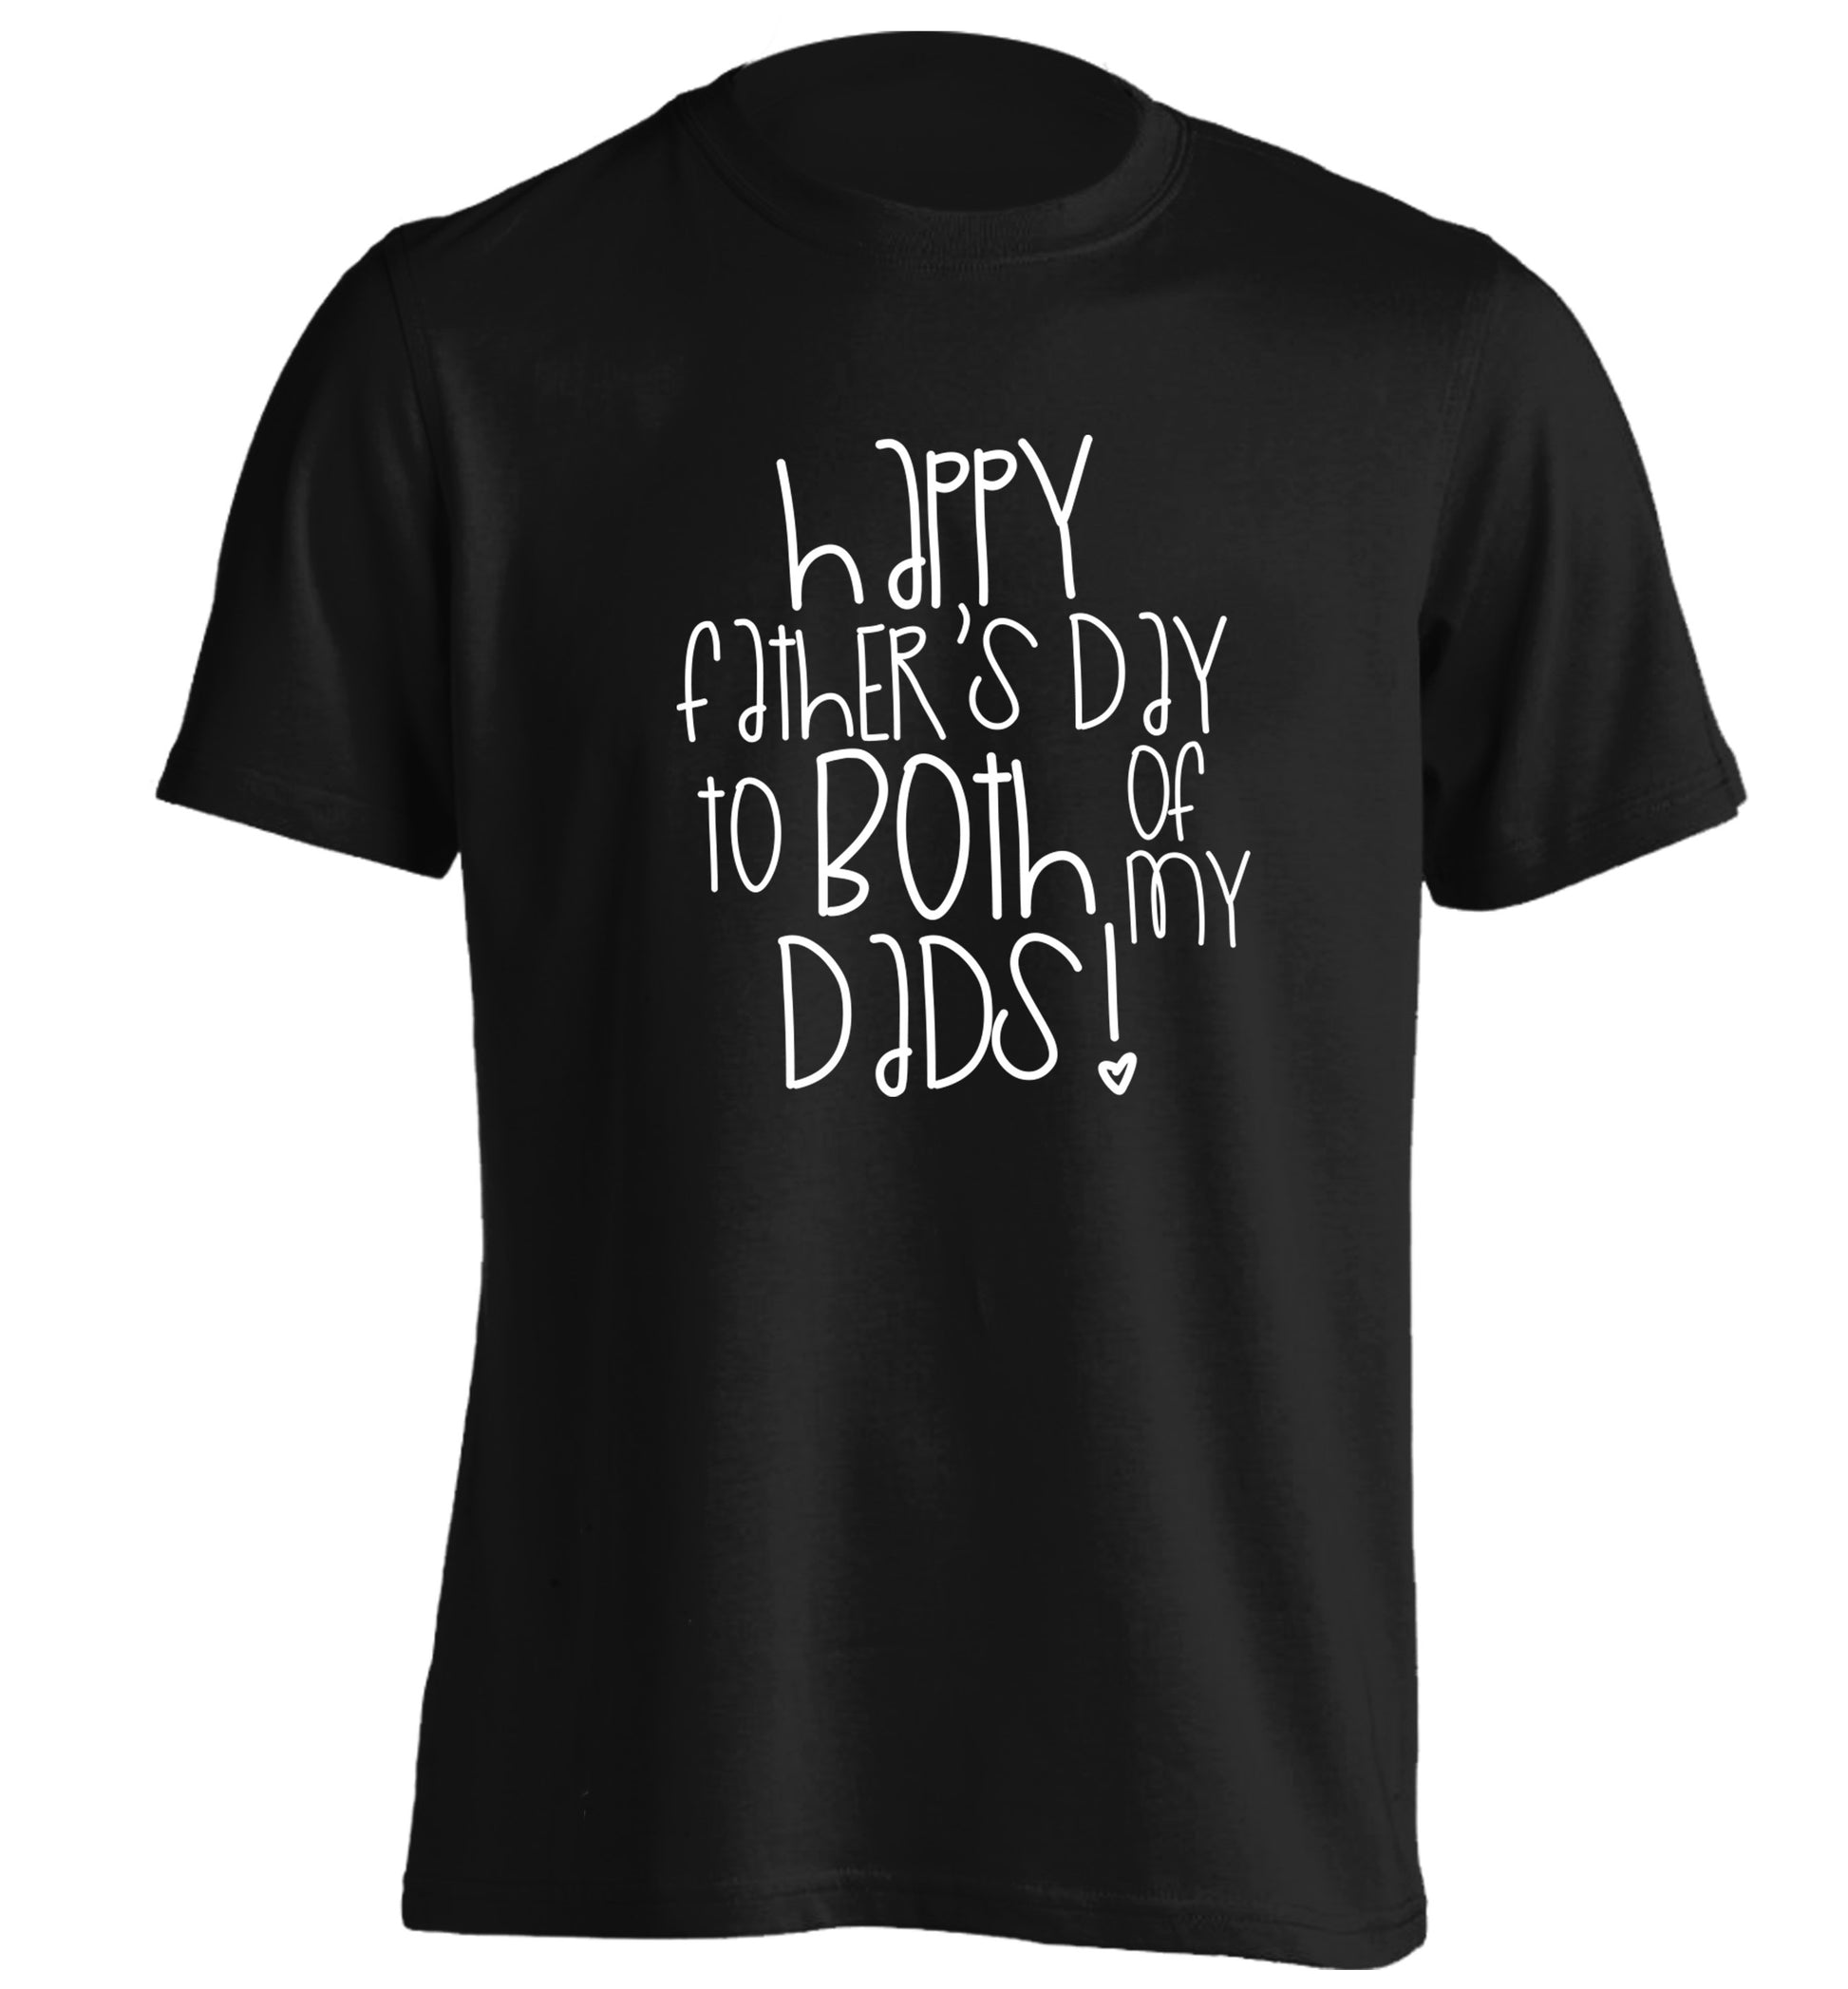 Happy father's day to both of my dads adults unisex black Tshirt 2XL